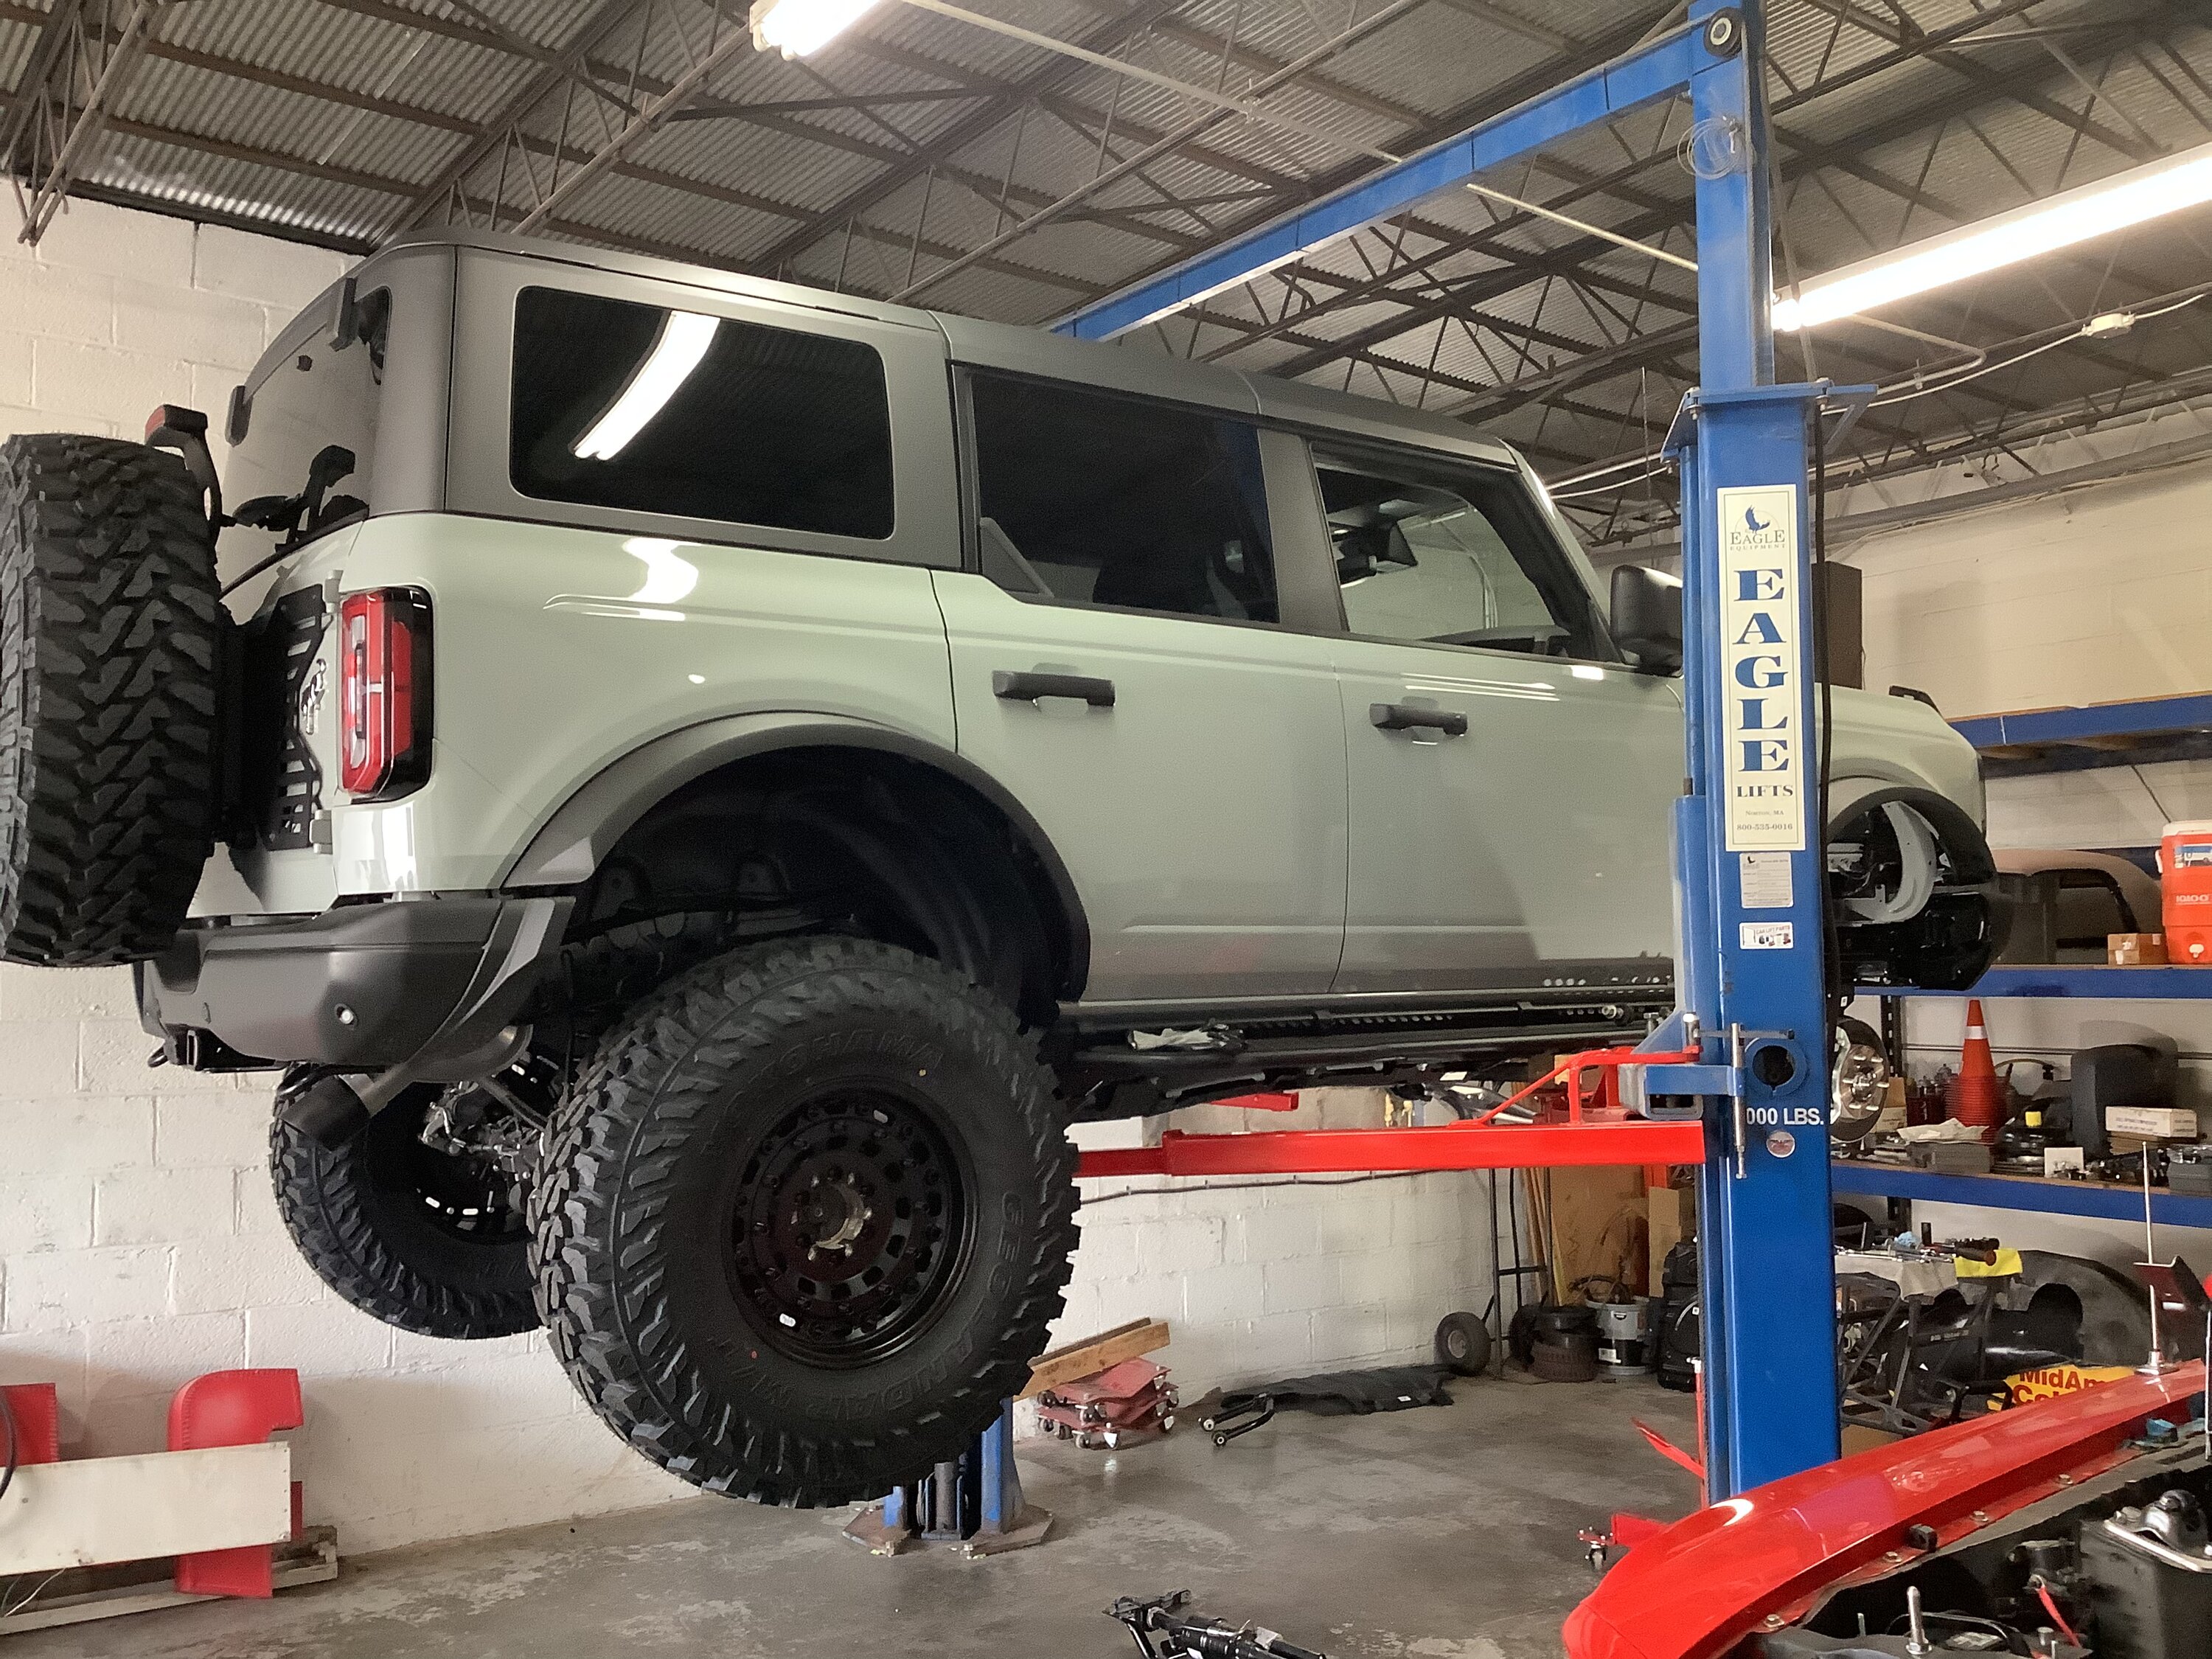 Ford Bronco Asking what's been asked before, what do I need for 35's/37's B718DDC1-097A-451B-BCAF-495C21BCB8CE